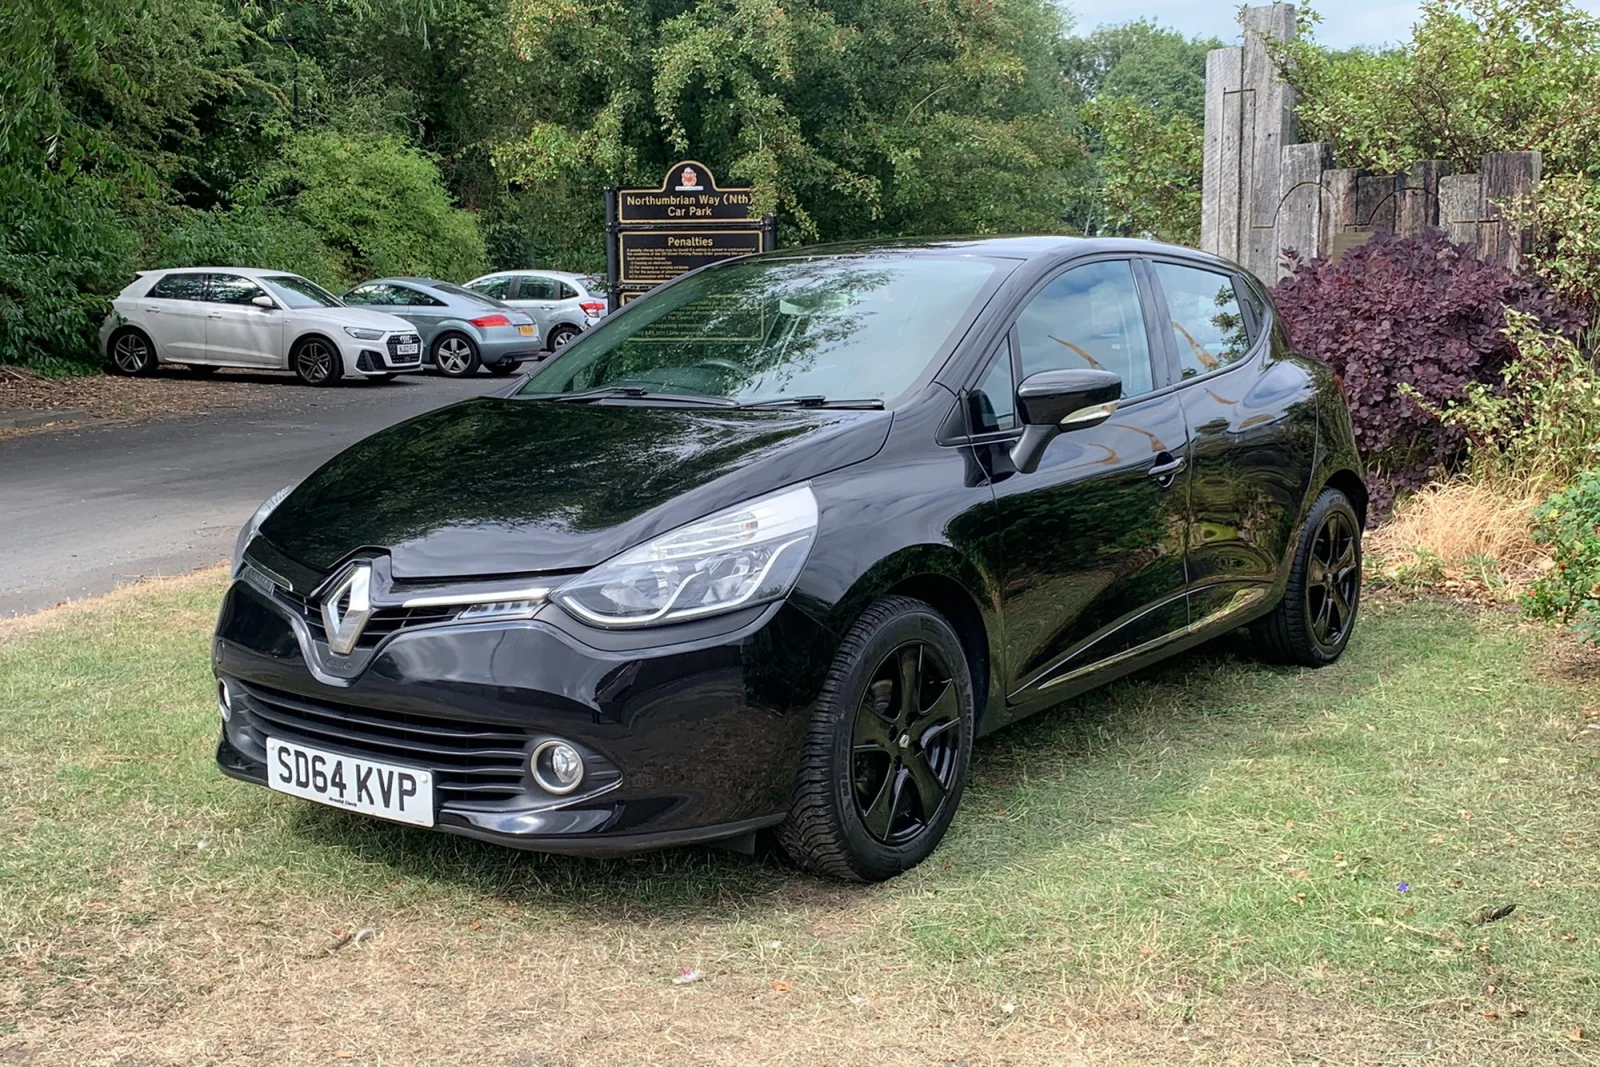 Black_Renault_Clio_for_sale-scaled.webp